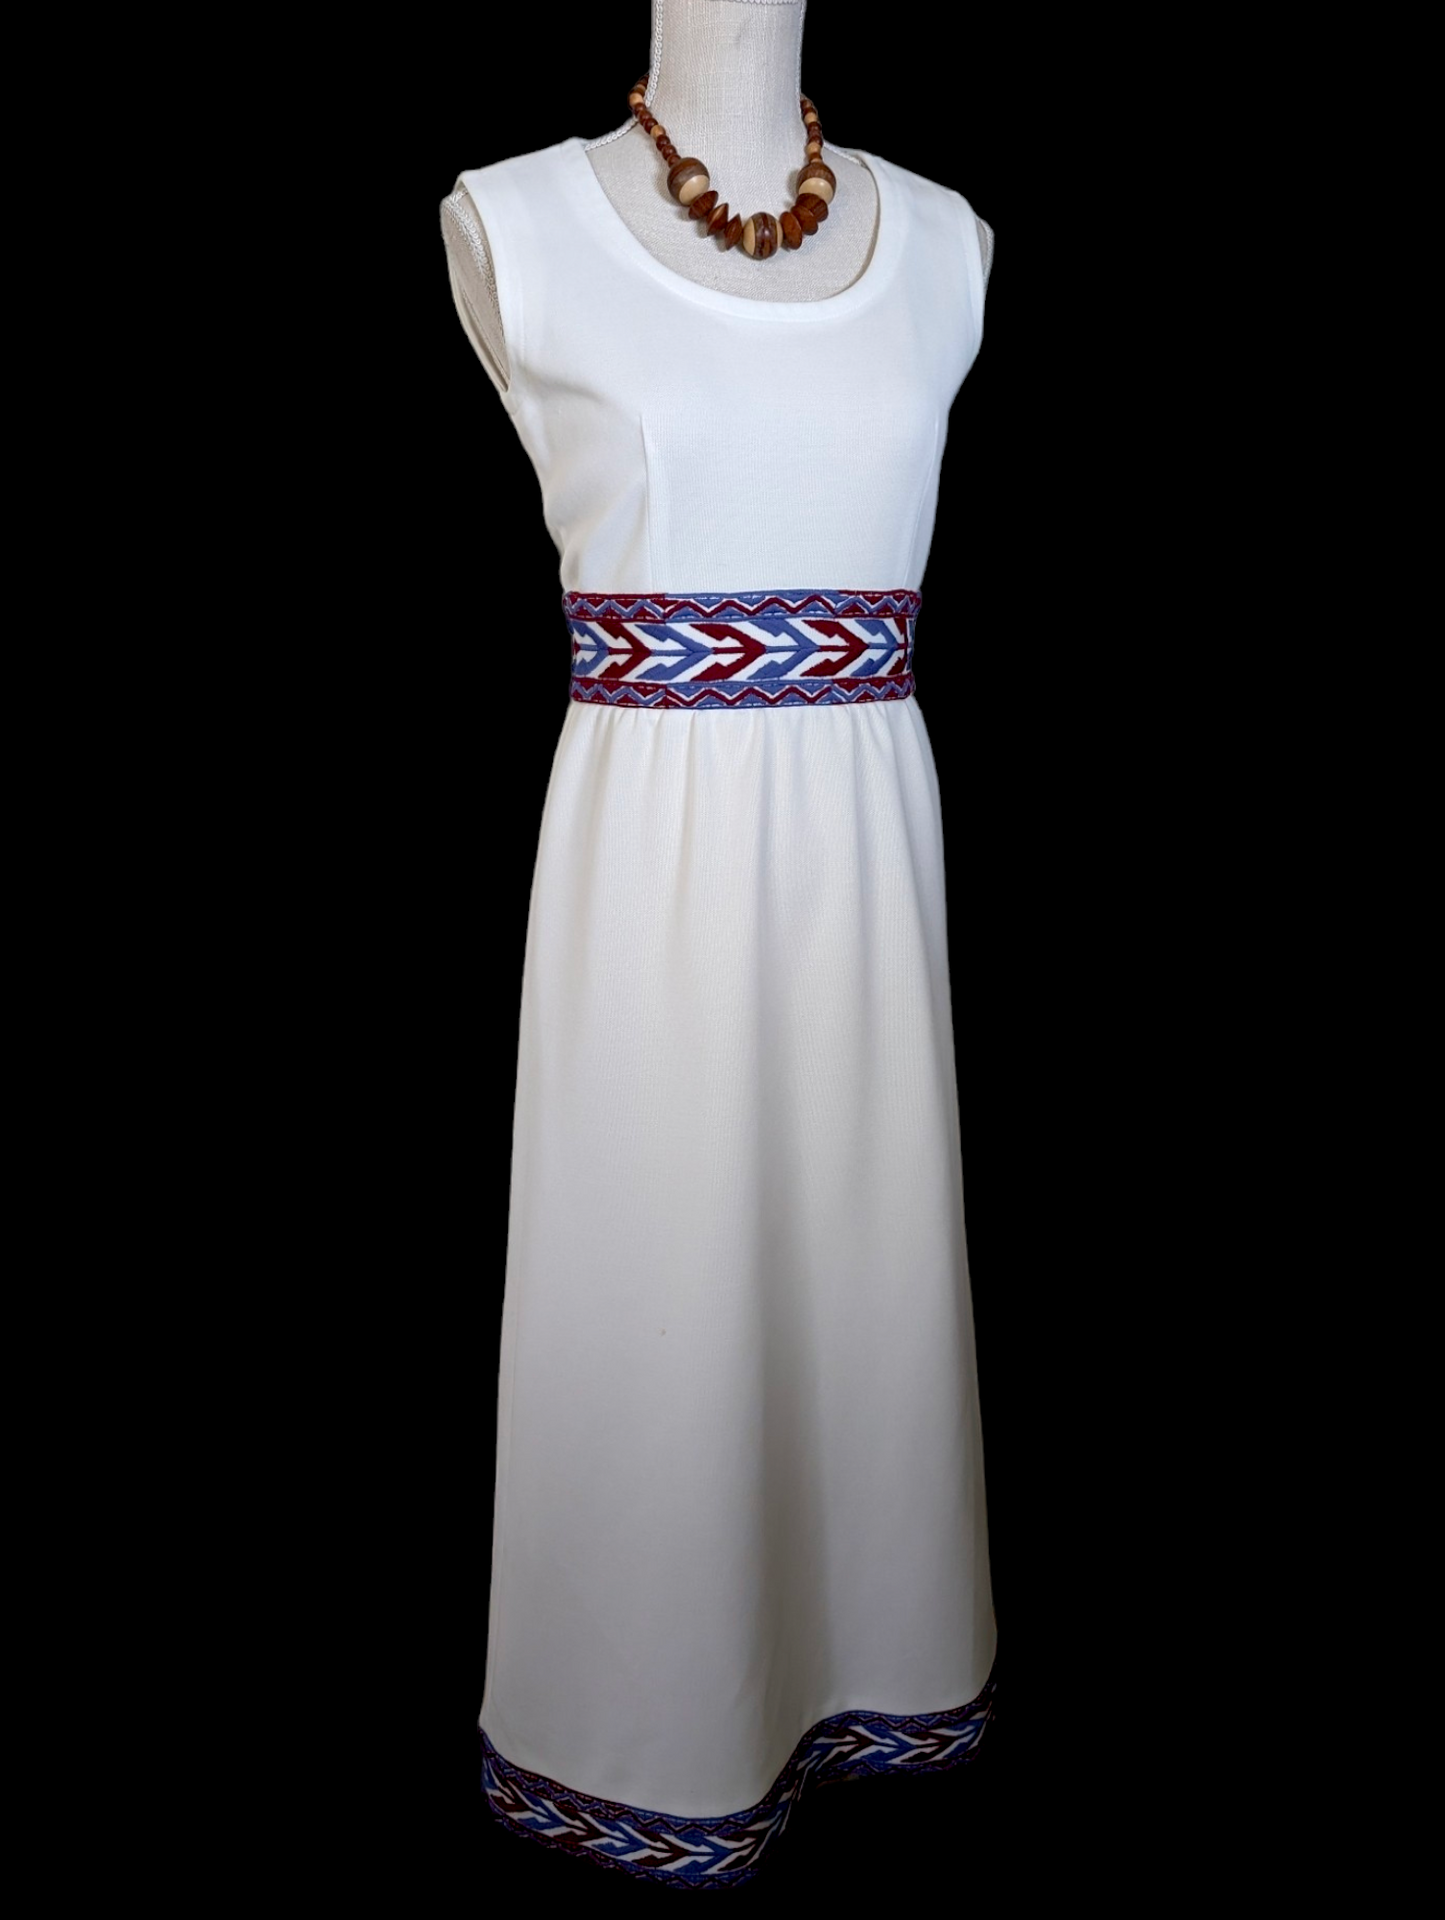 1970s White Mod A-Line Sleeveless Dress with Burgundy and Periwinkle Embroidery